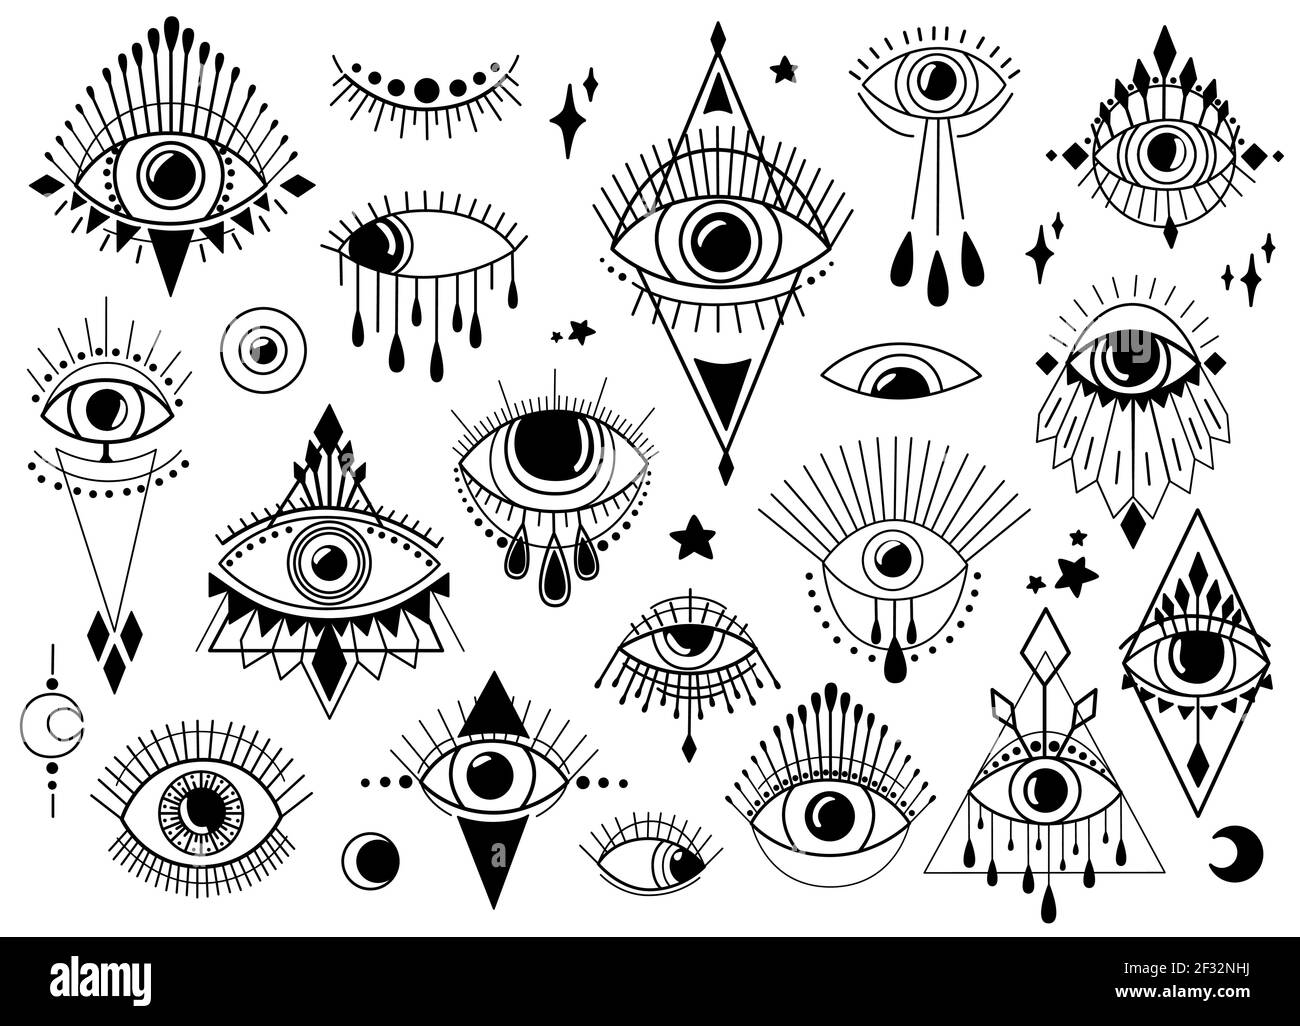 Magic witchcraft eye symbol. Evil eye. Magical esoteric  collection, religion sacred geometry symbols vector illustration icons set Stock Vector